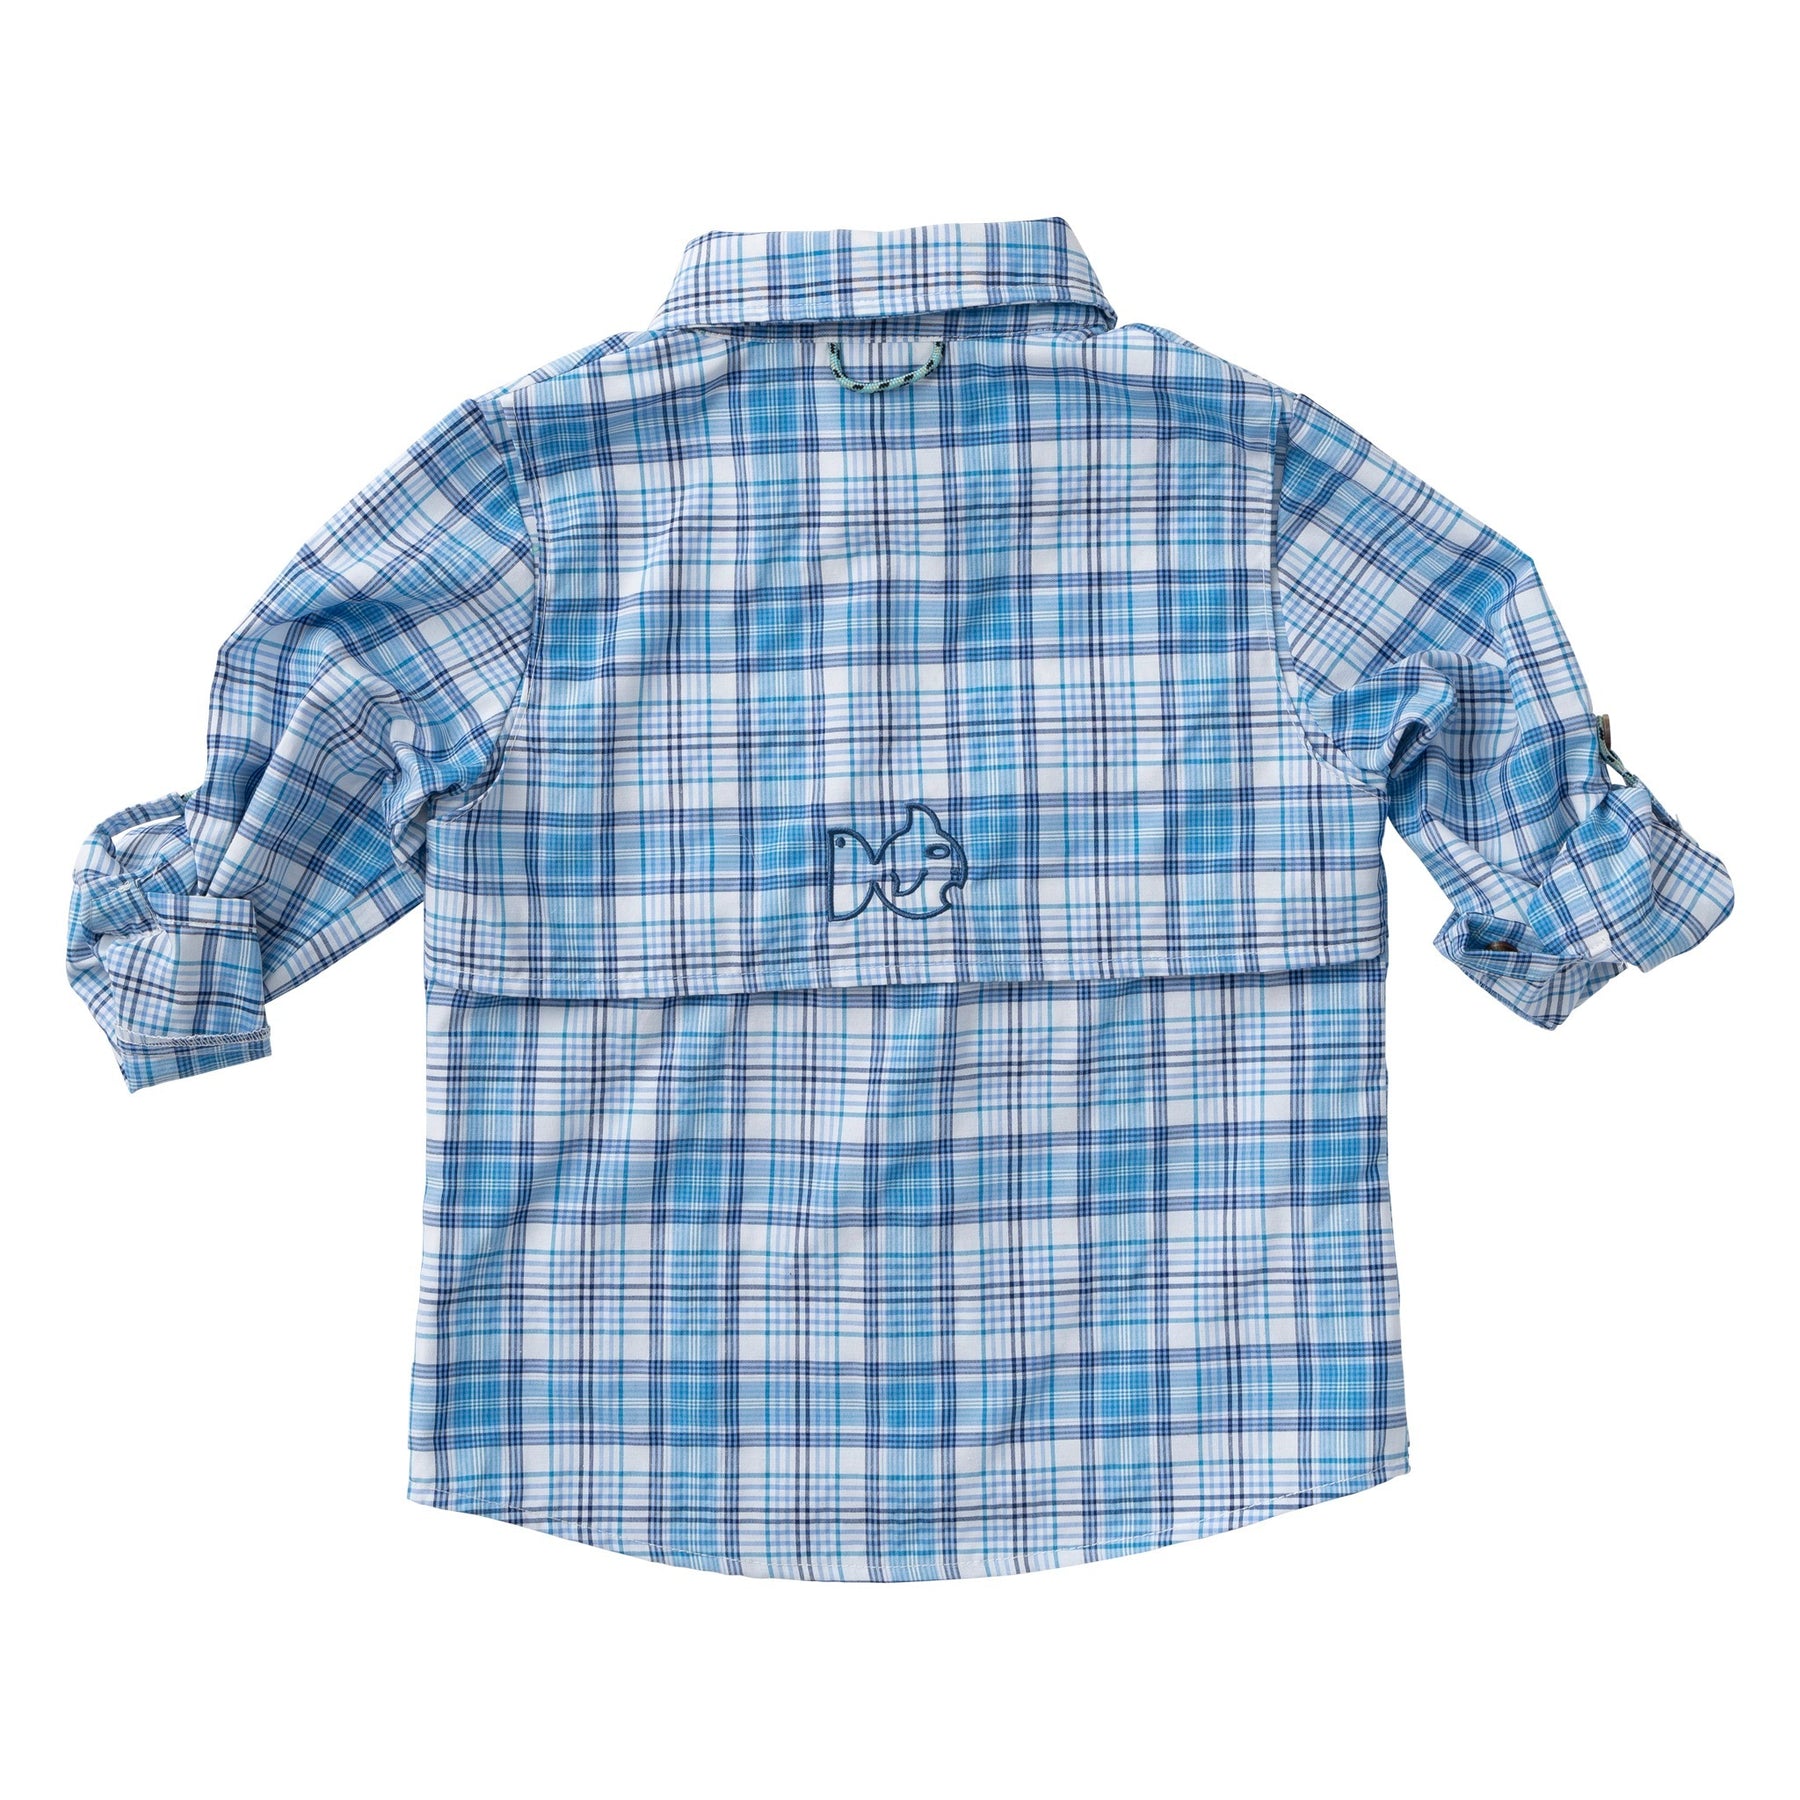 Founders Kids Fishing Shirt - Ethereal Blue Plaid / 2T